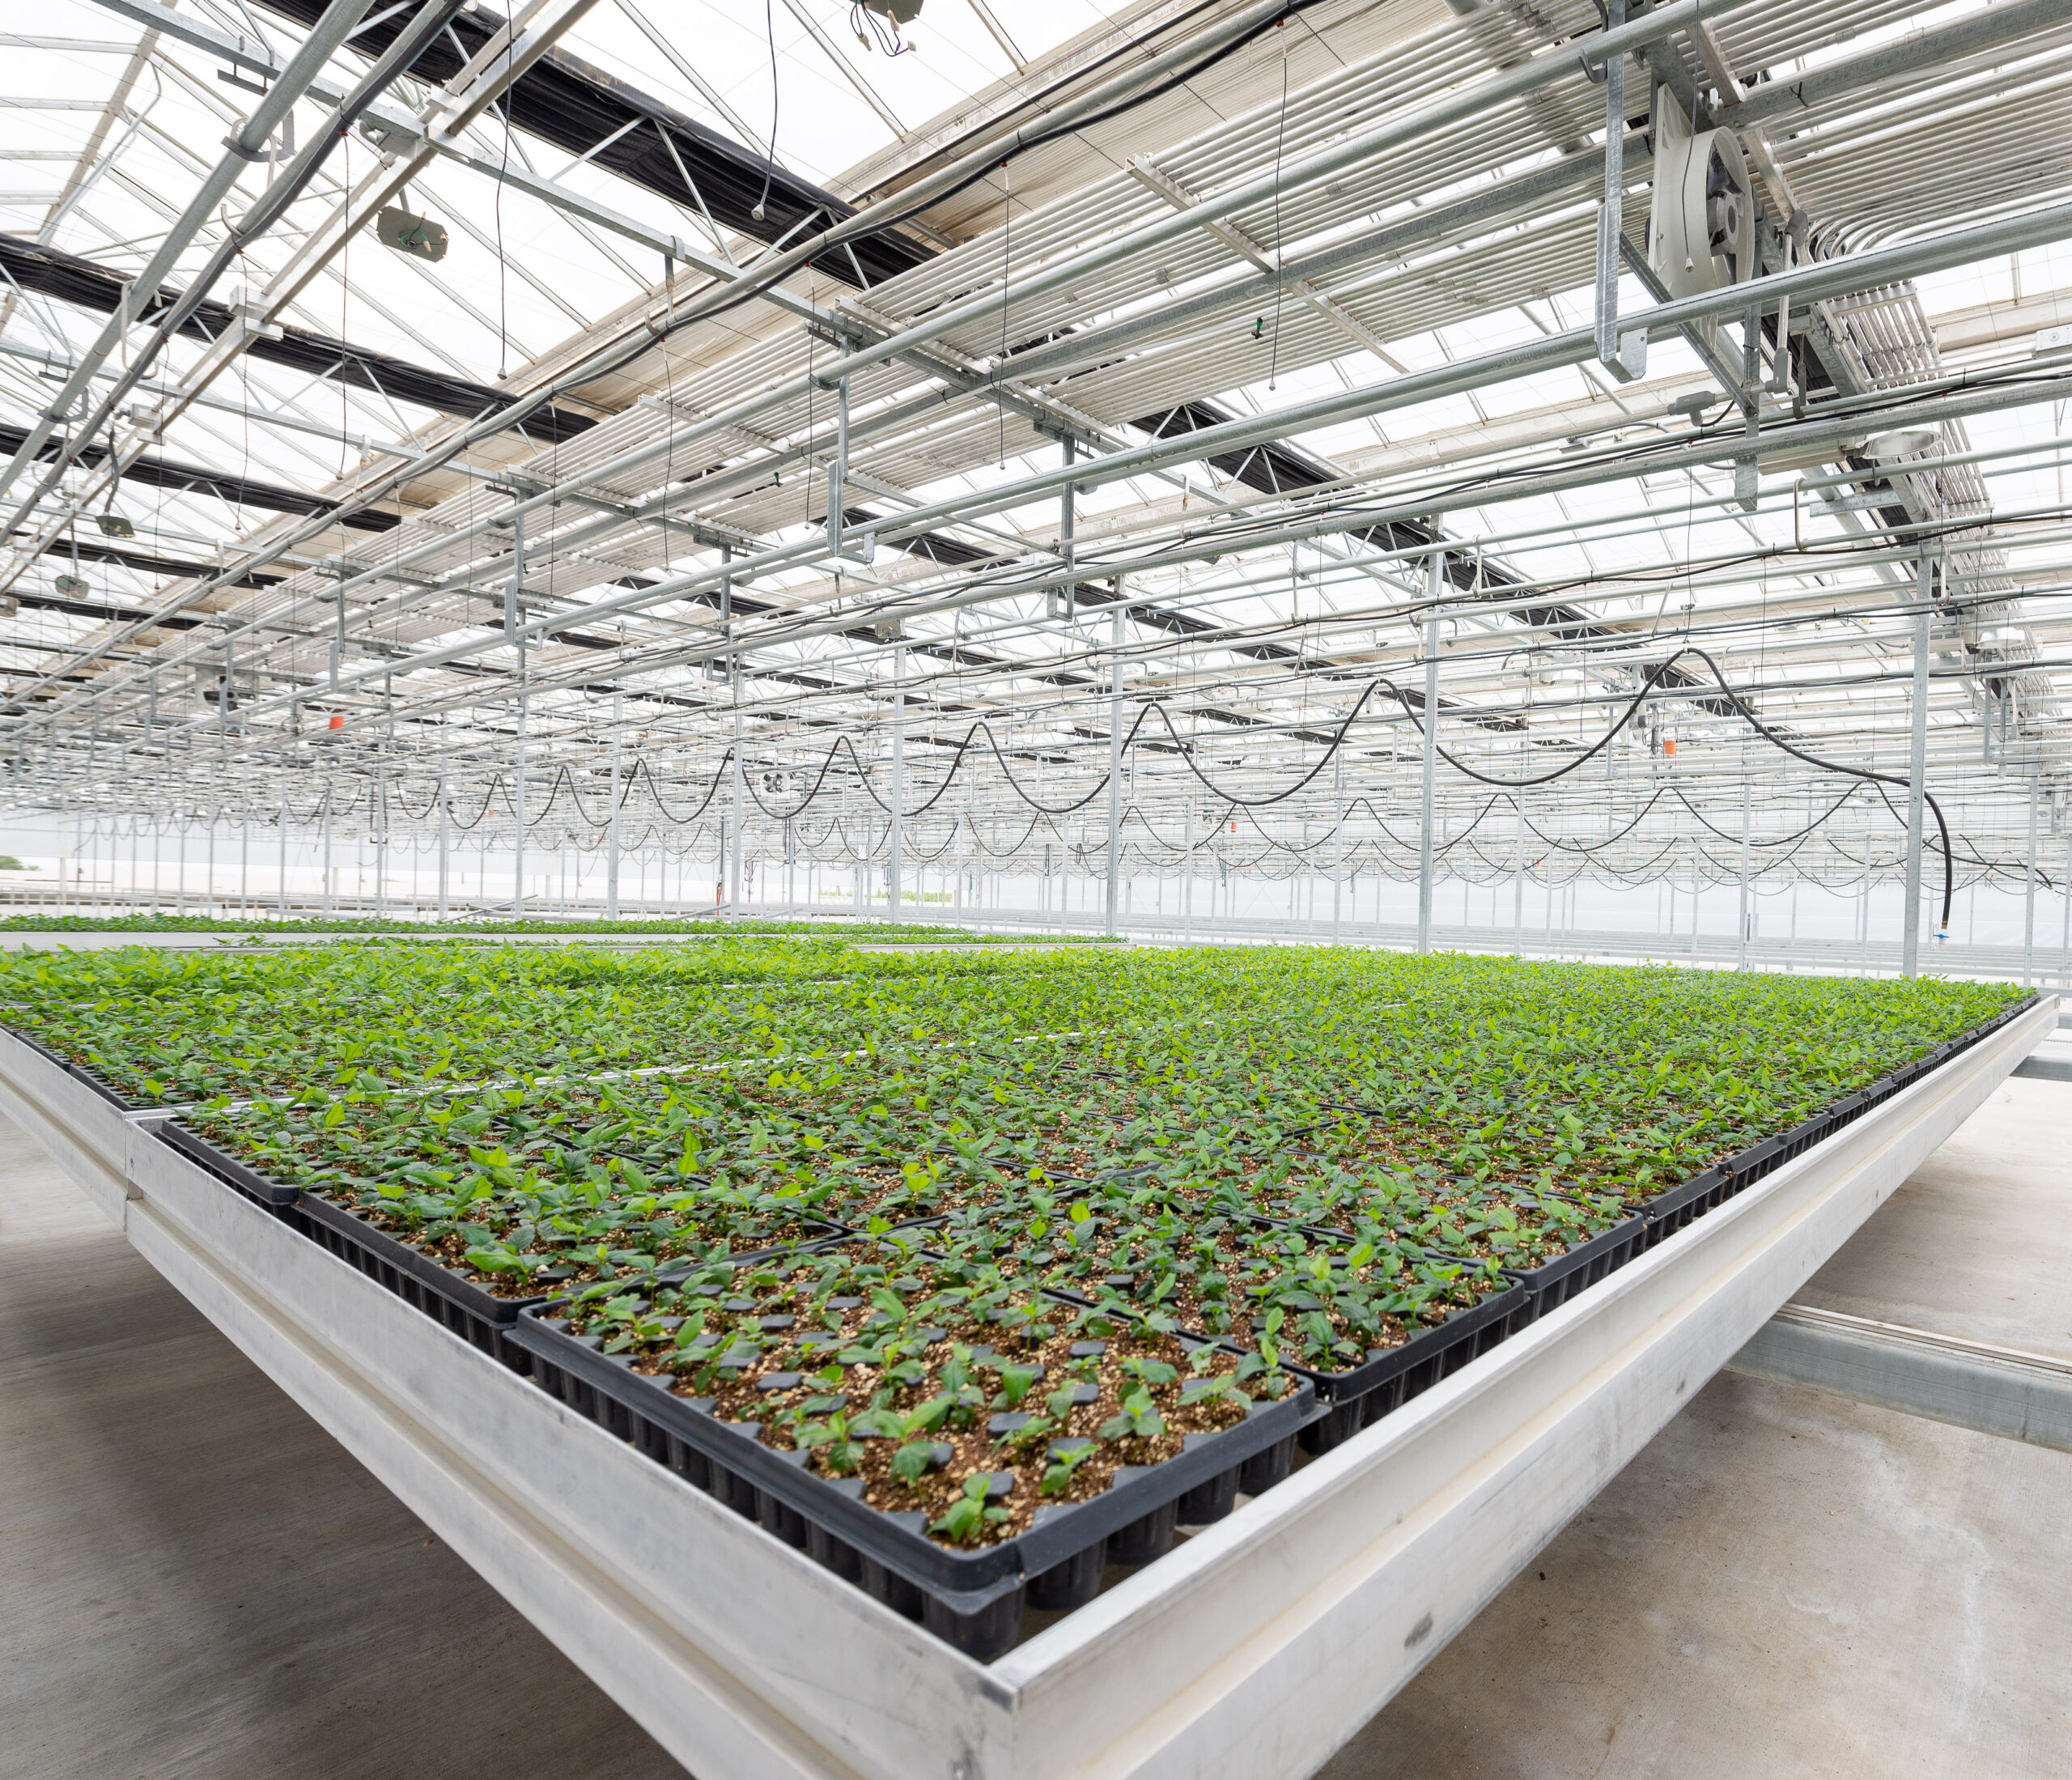 Qualterra Greenhouse Plants in greenhouse – just after Acclimation